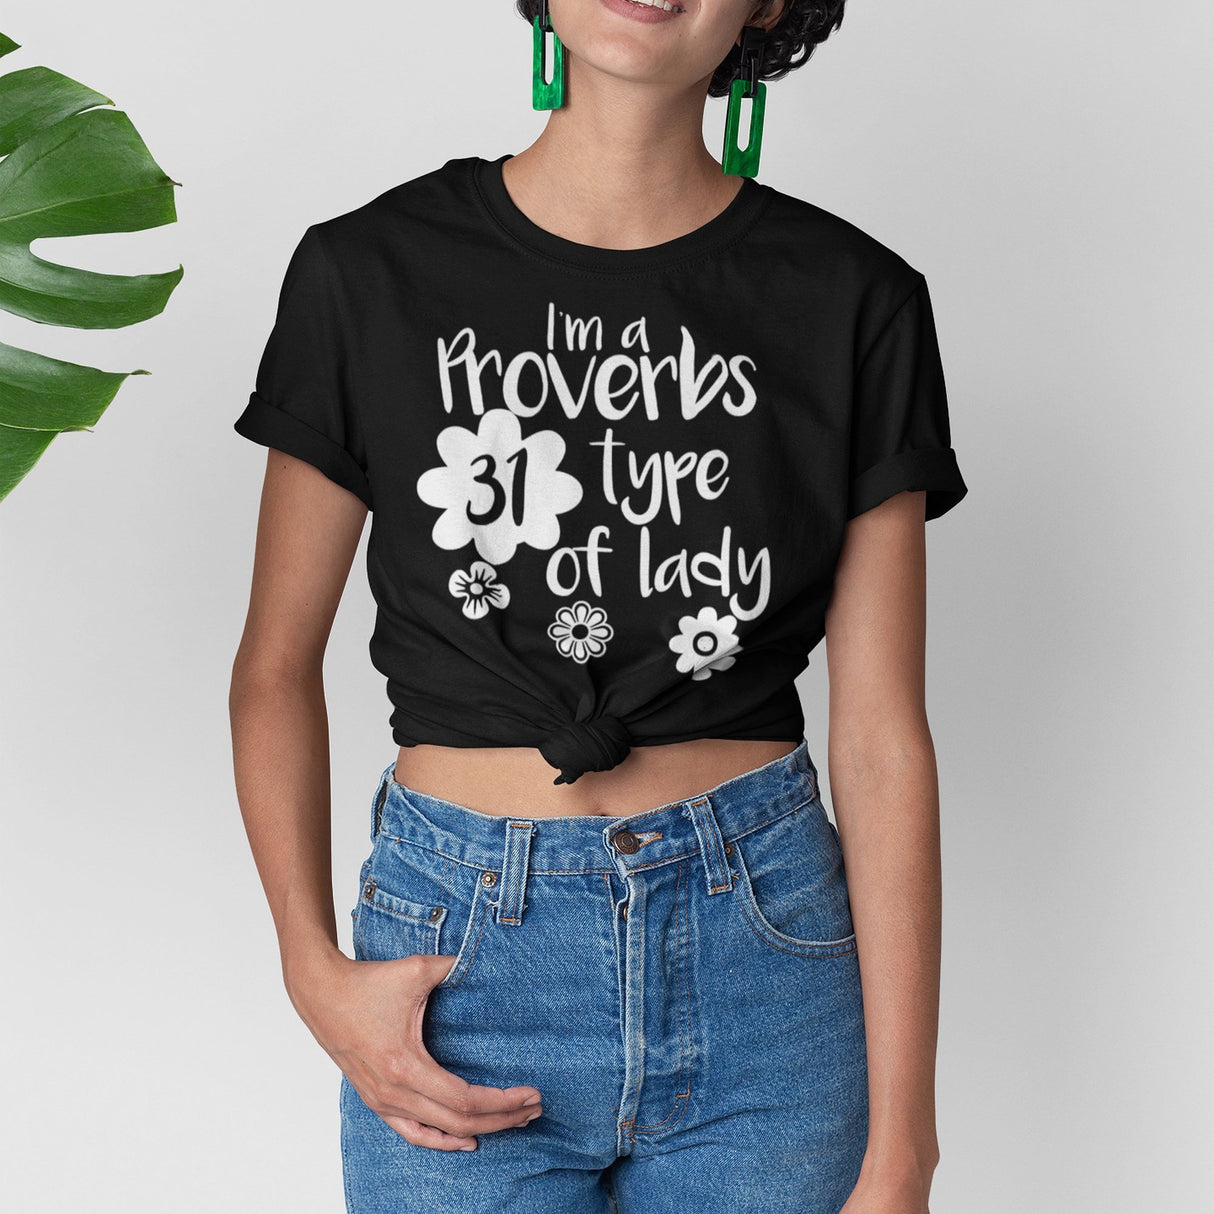 im-a-proverbs-31-type-of-lady-proverbs-tee-31-t-shirt-lady-tee-t-shirt-tee#color_black